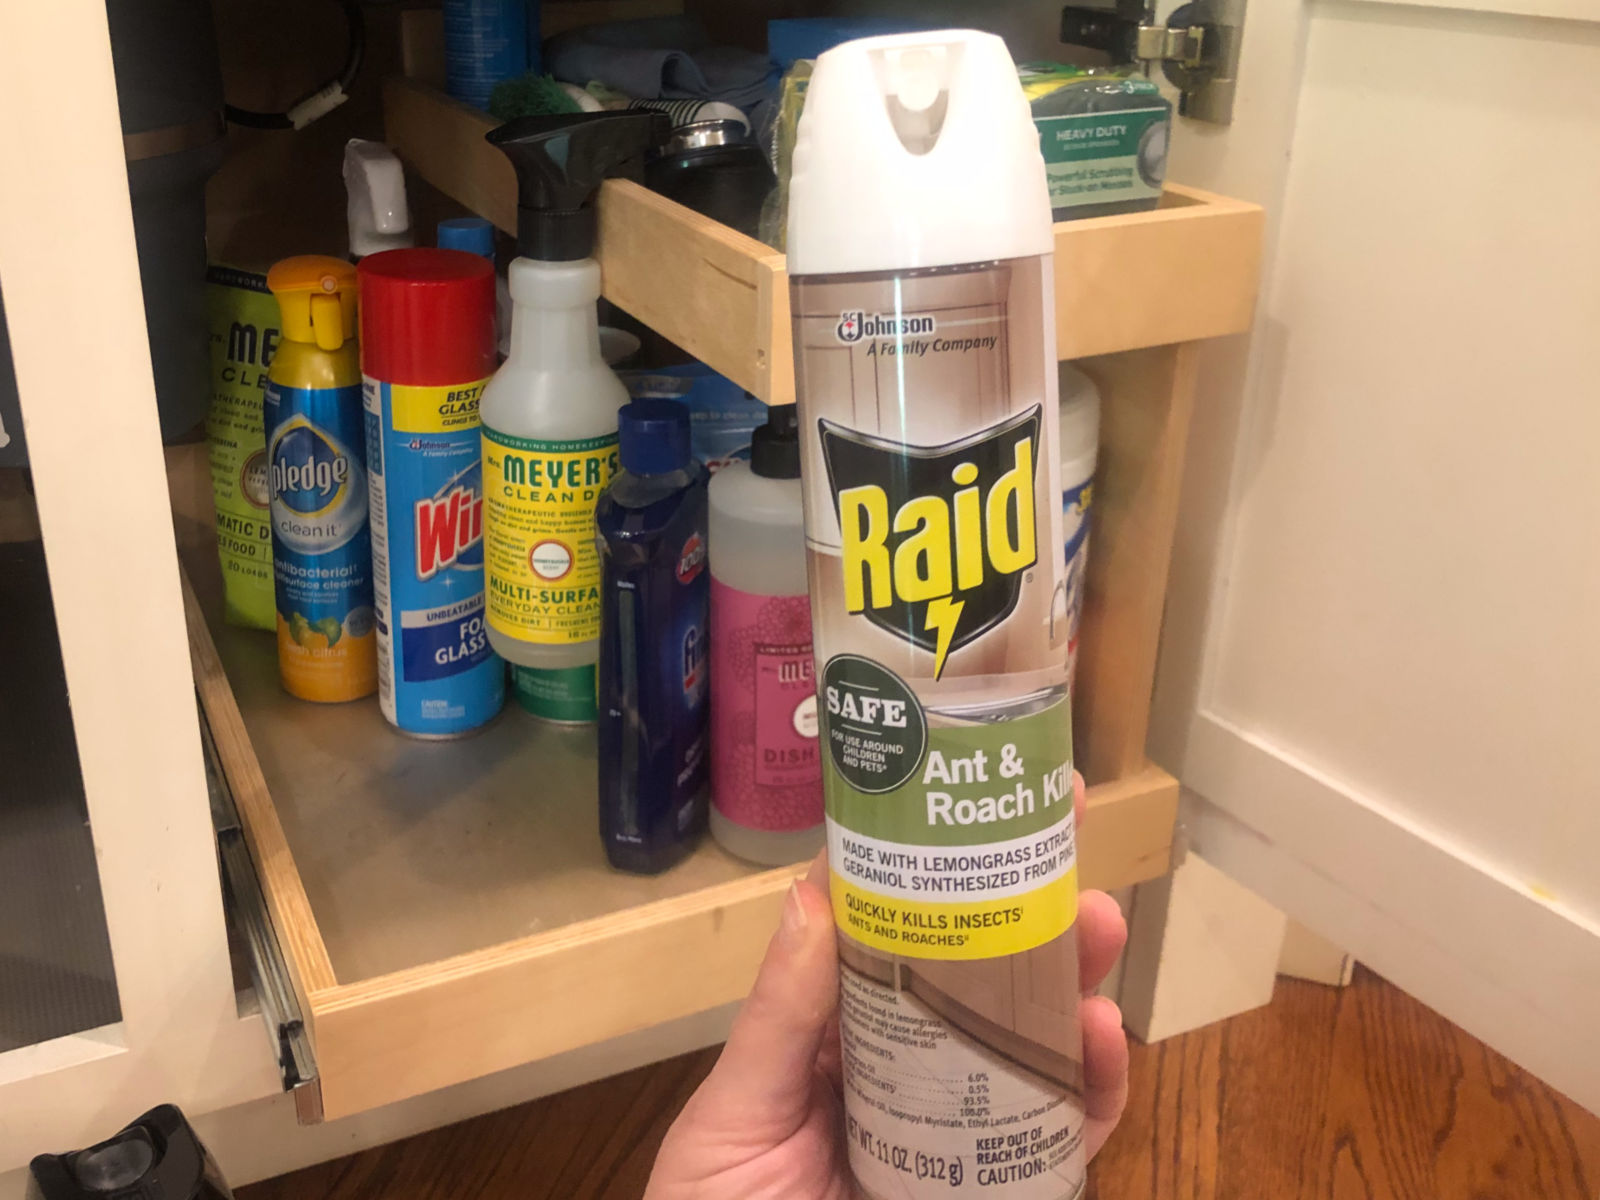 Kill Roaches And Ants With Raid Ant & Roach With Essential Oils – Available At Your Local Publix on I Heart Publix